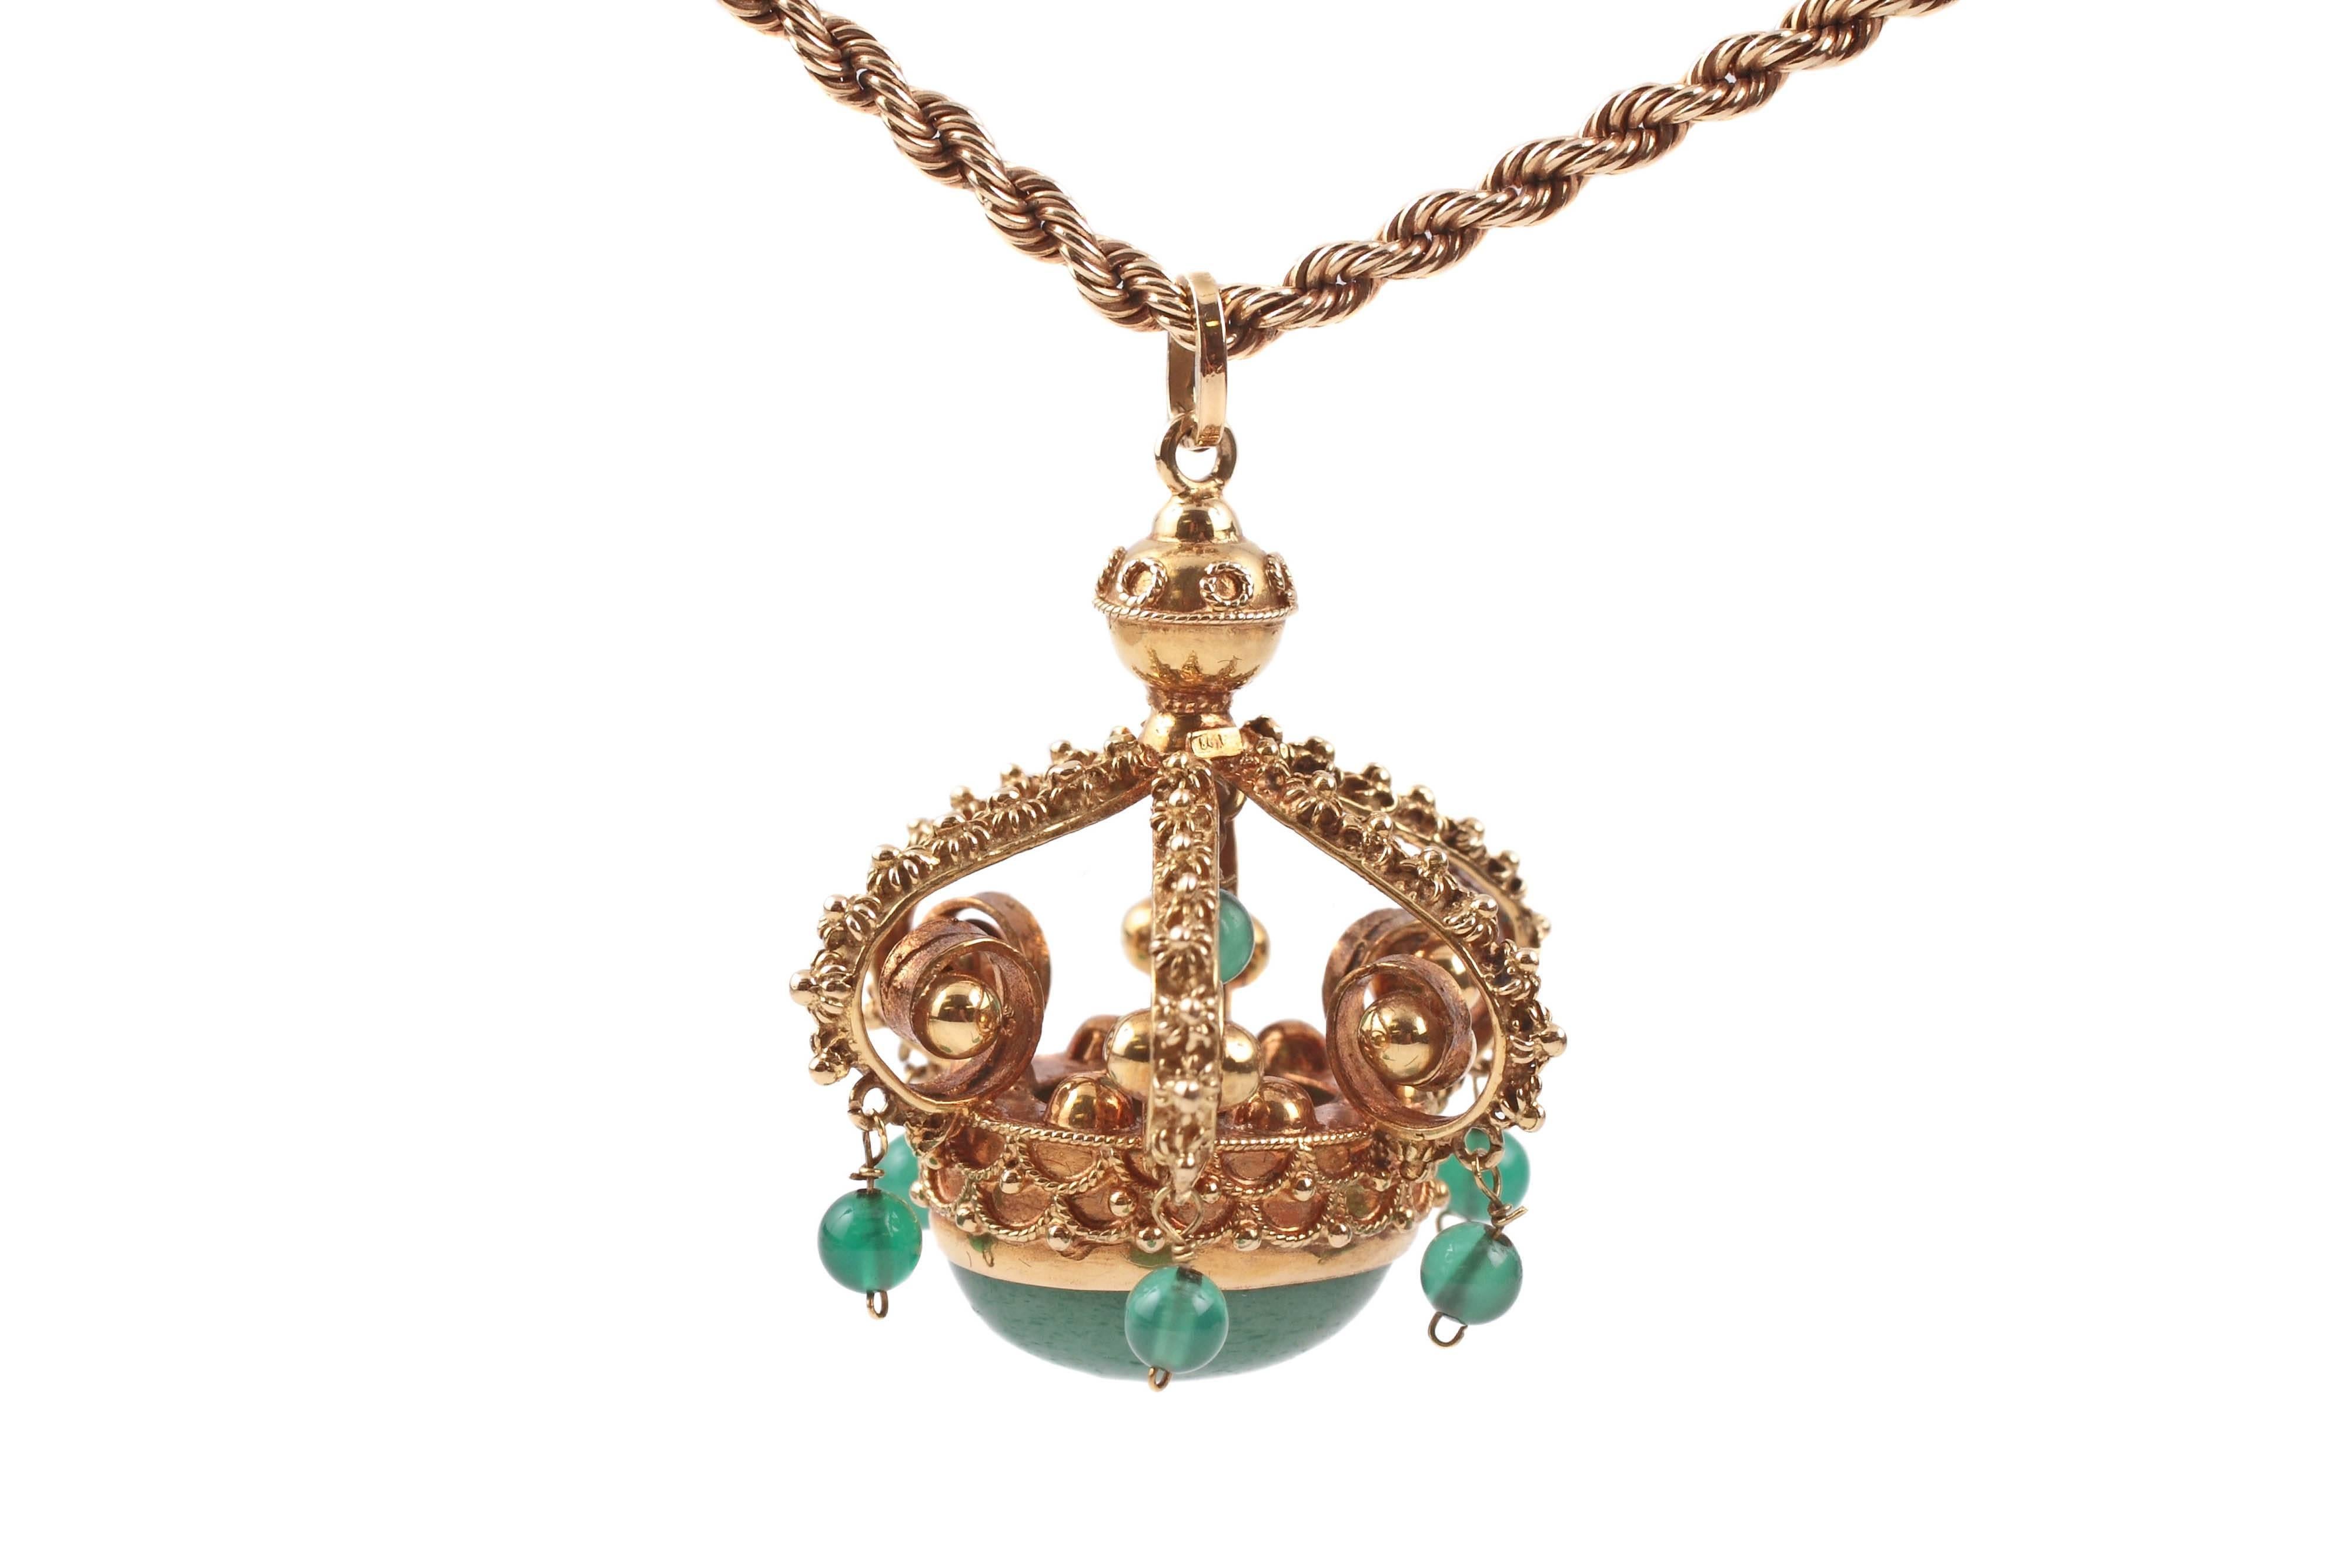 Intricately detailed crown pendant with green aventurine accents, in 14 karat yellow gold.